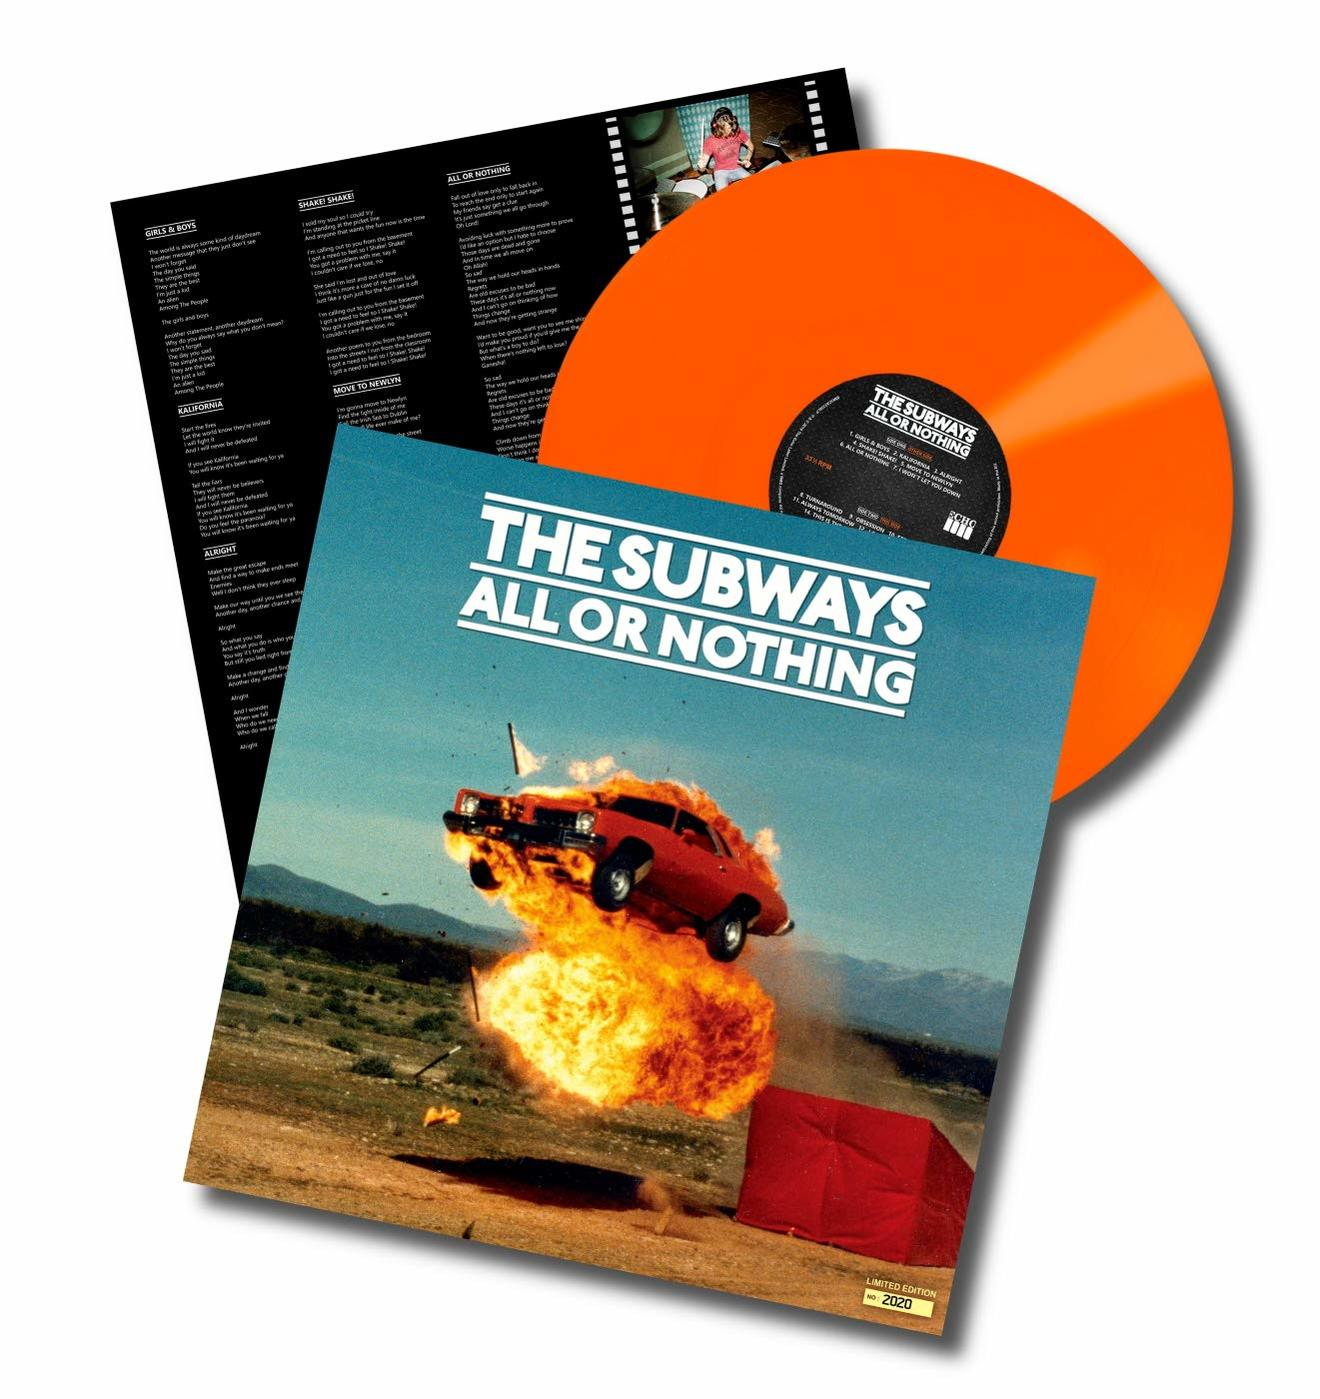 The ALL OR EDITION) (ANNIVERSARY (Vinyl) - NOTHING - Subways